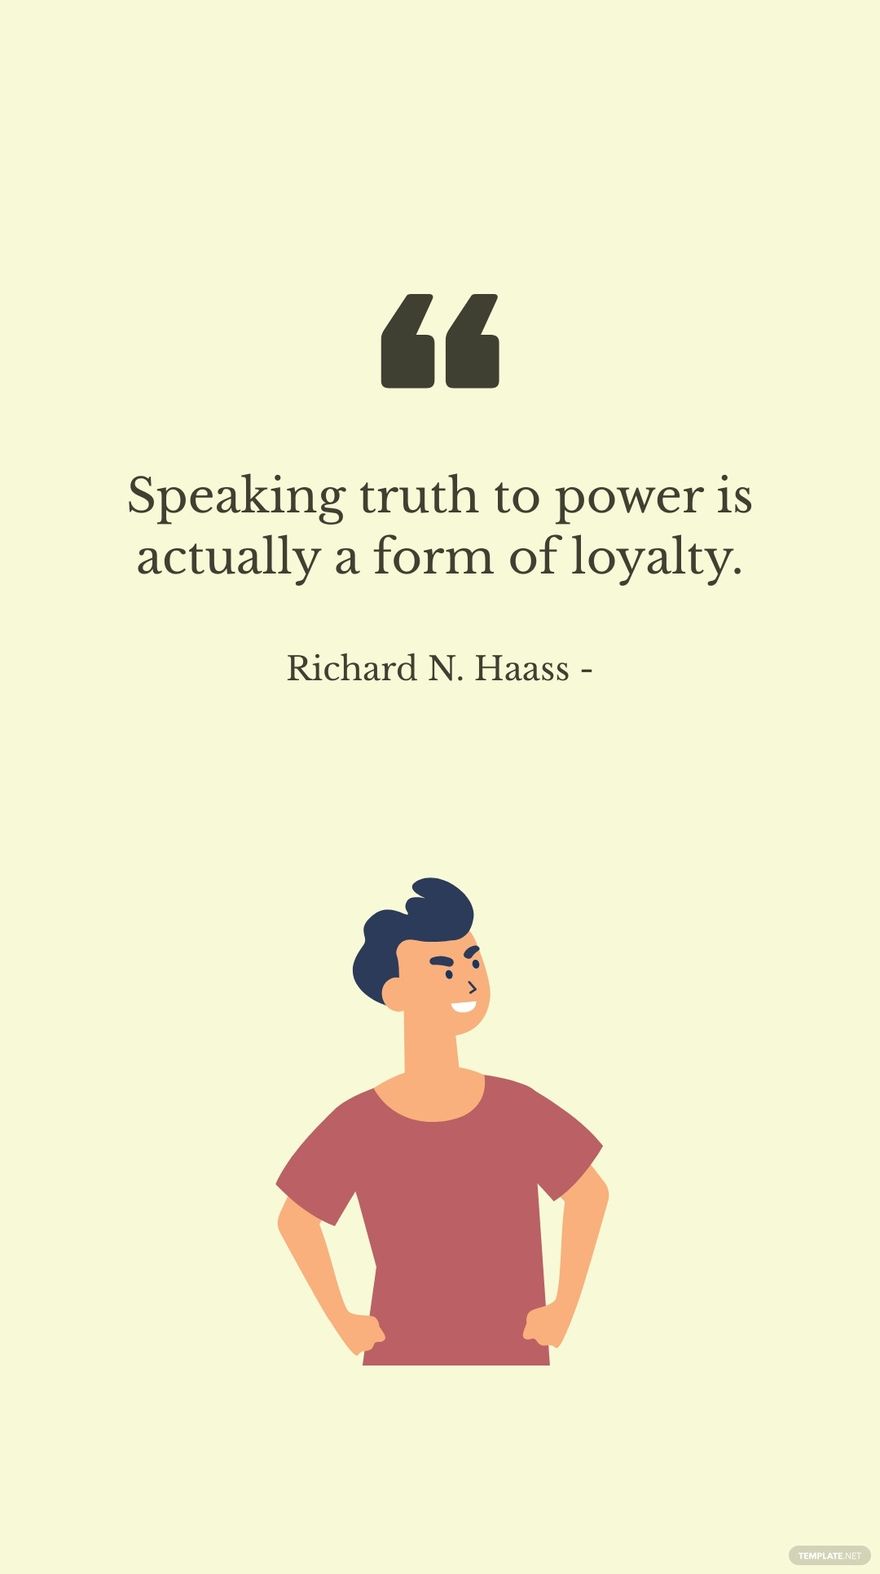 Free Richard N. Haass - Speaking truth to power is actually a form of loyalty. in JPG